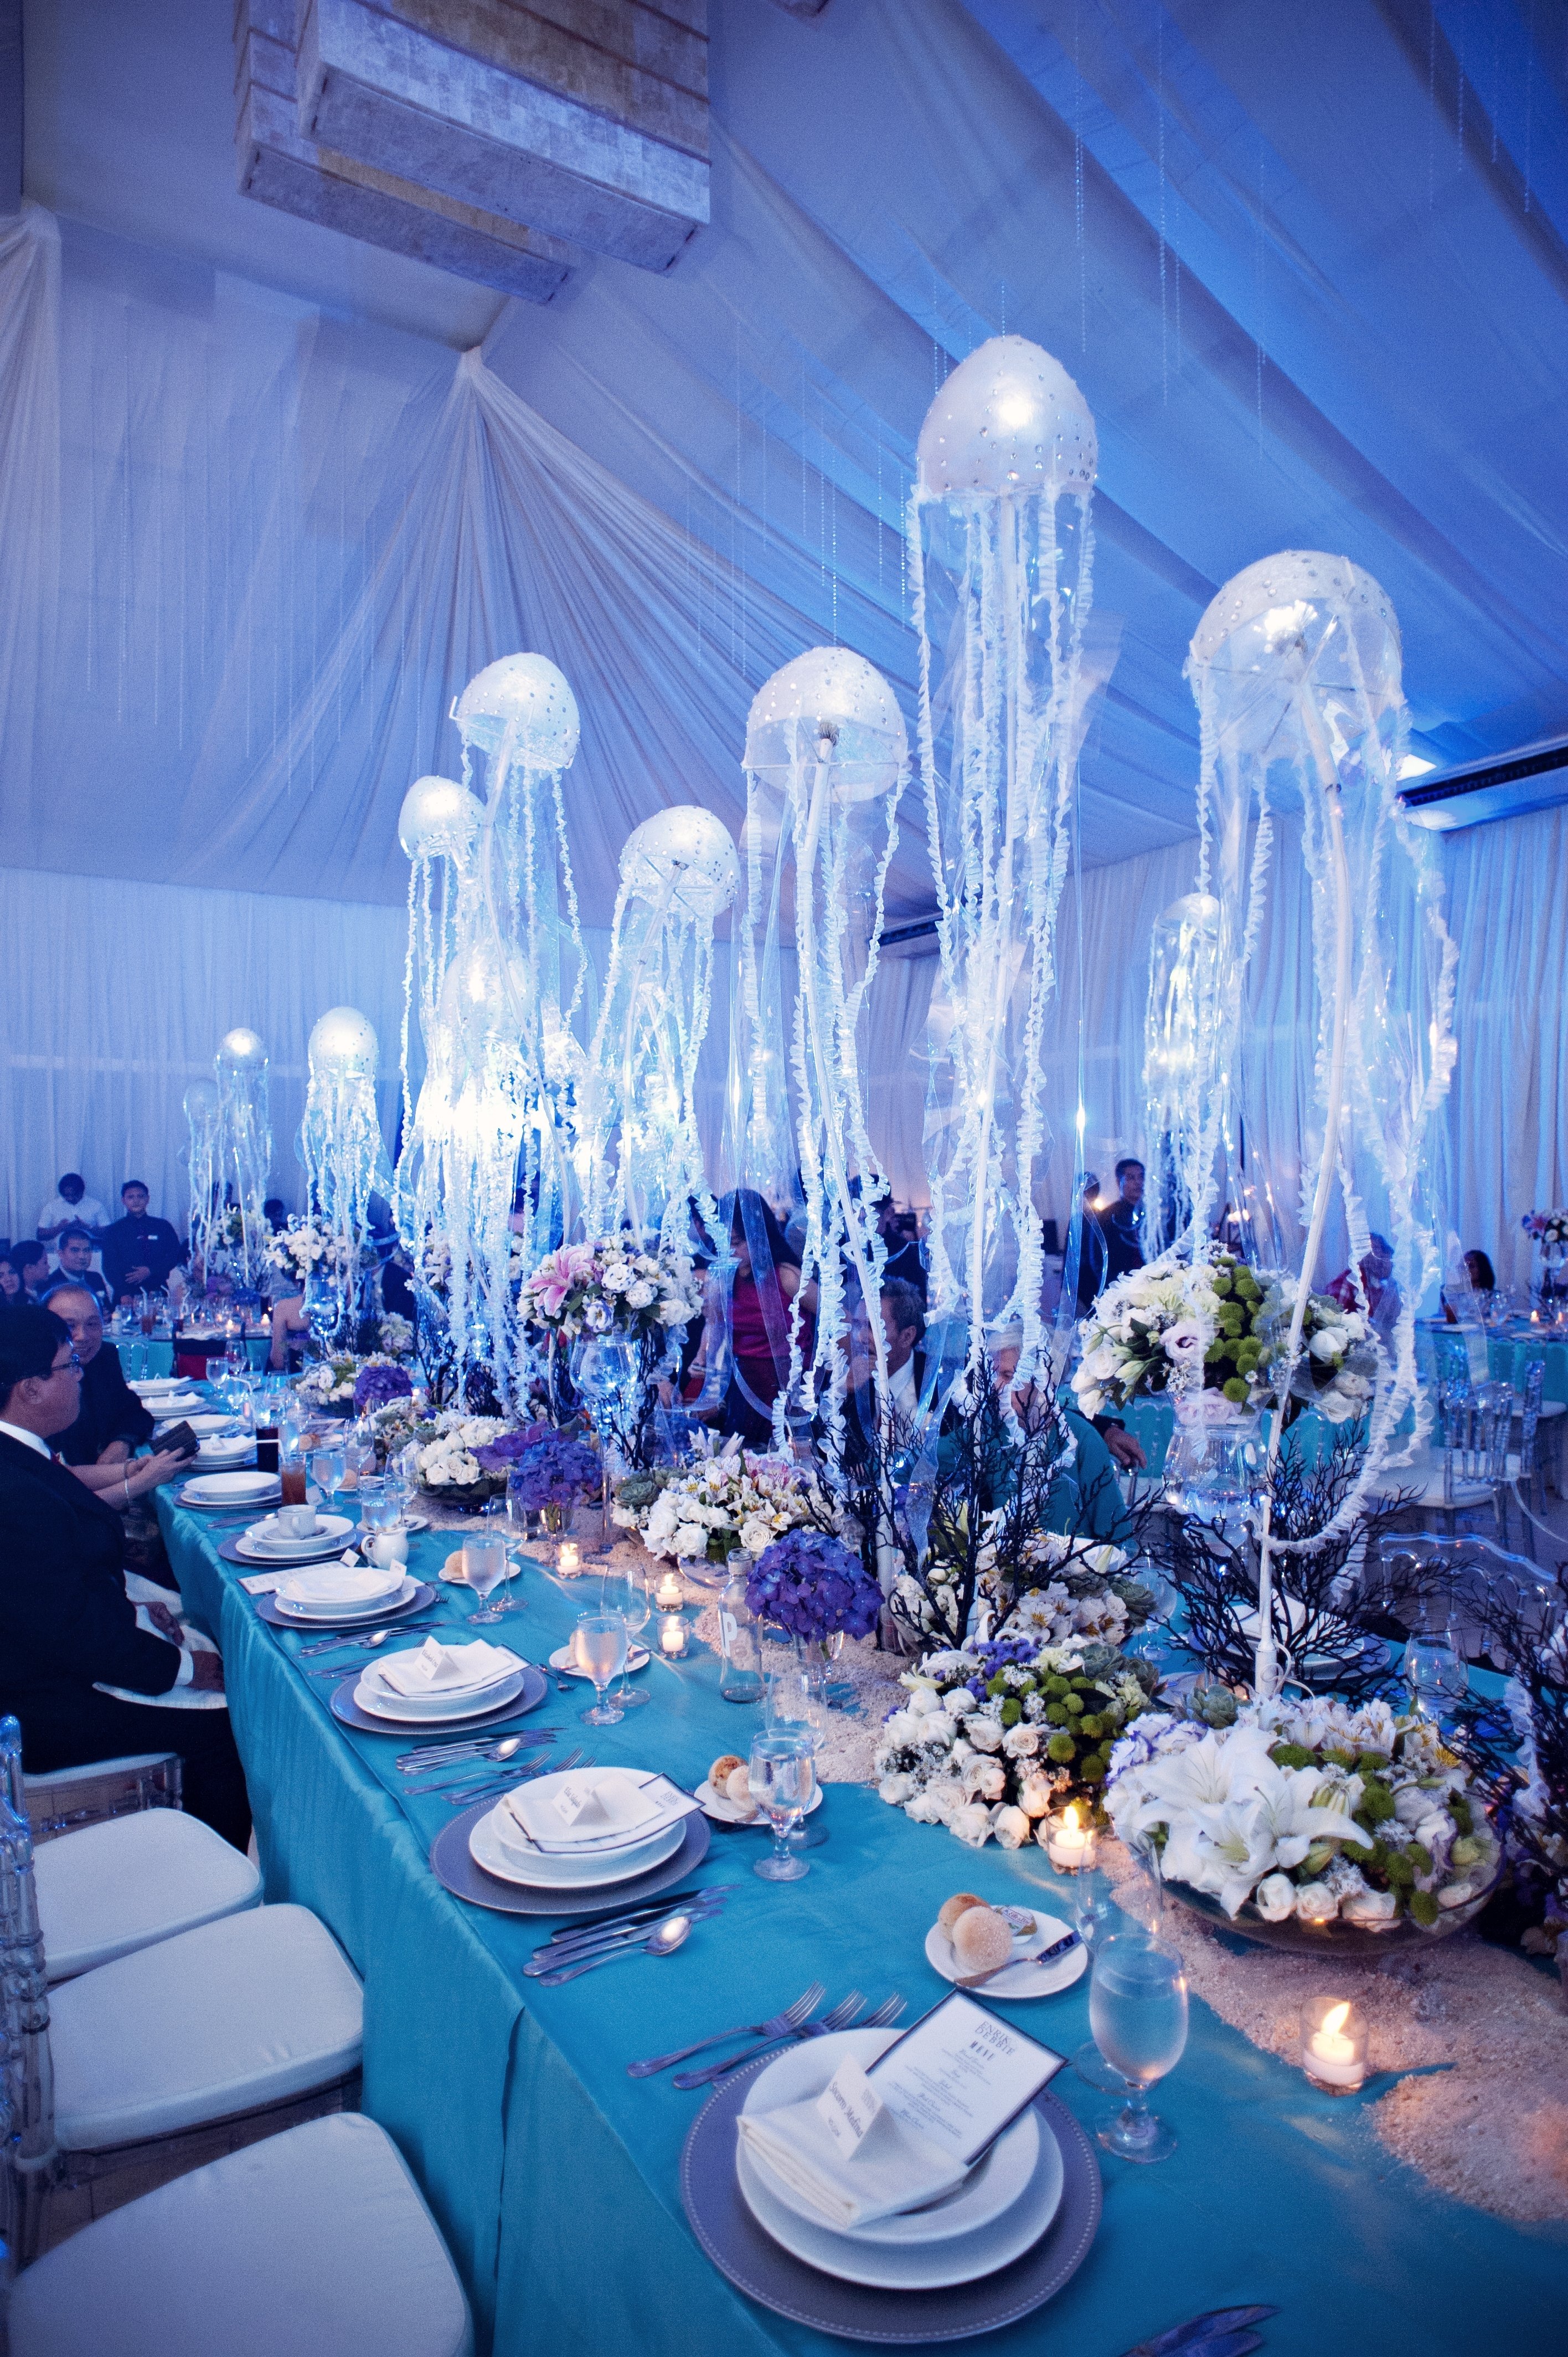 10 Fabulous Under The Sea Centerpiece Ideas under the sea wedding motif with hanging jellyfish table decorations 2023